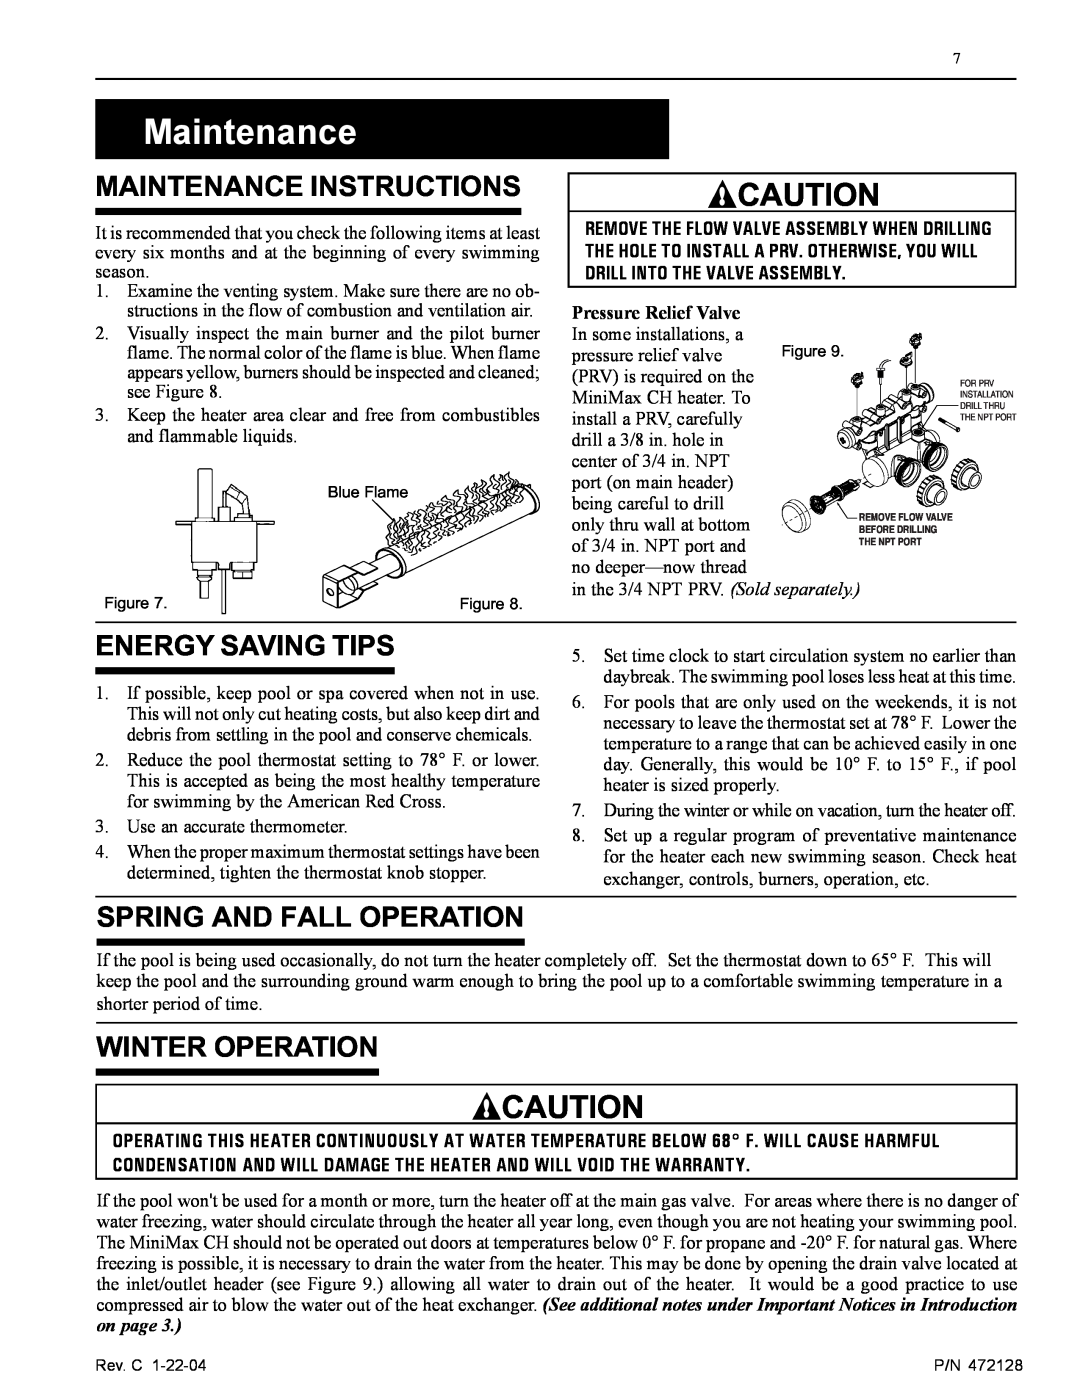 Pentair CH Maintenance Instructions, Energy Saving Tips, Spring And Fall Operation, Winter Operation 